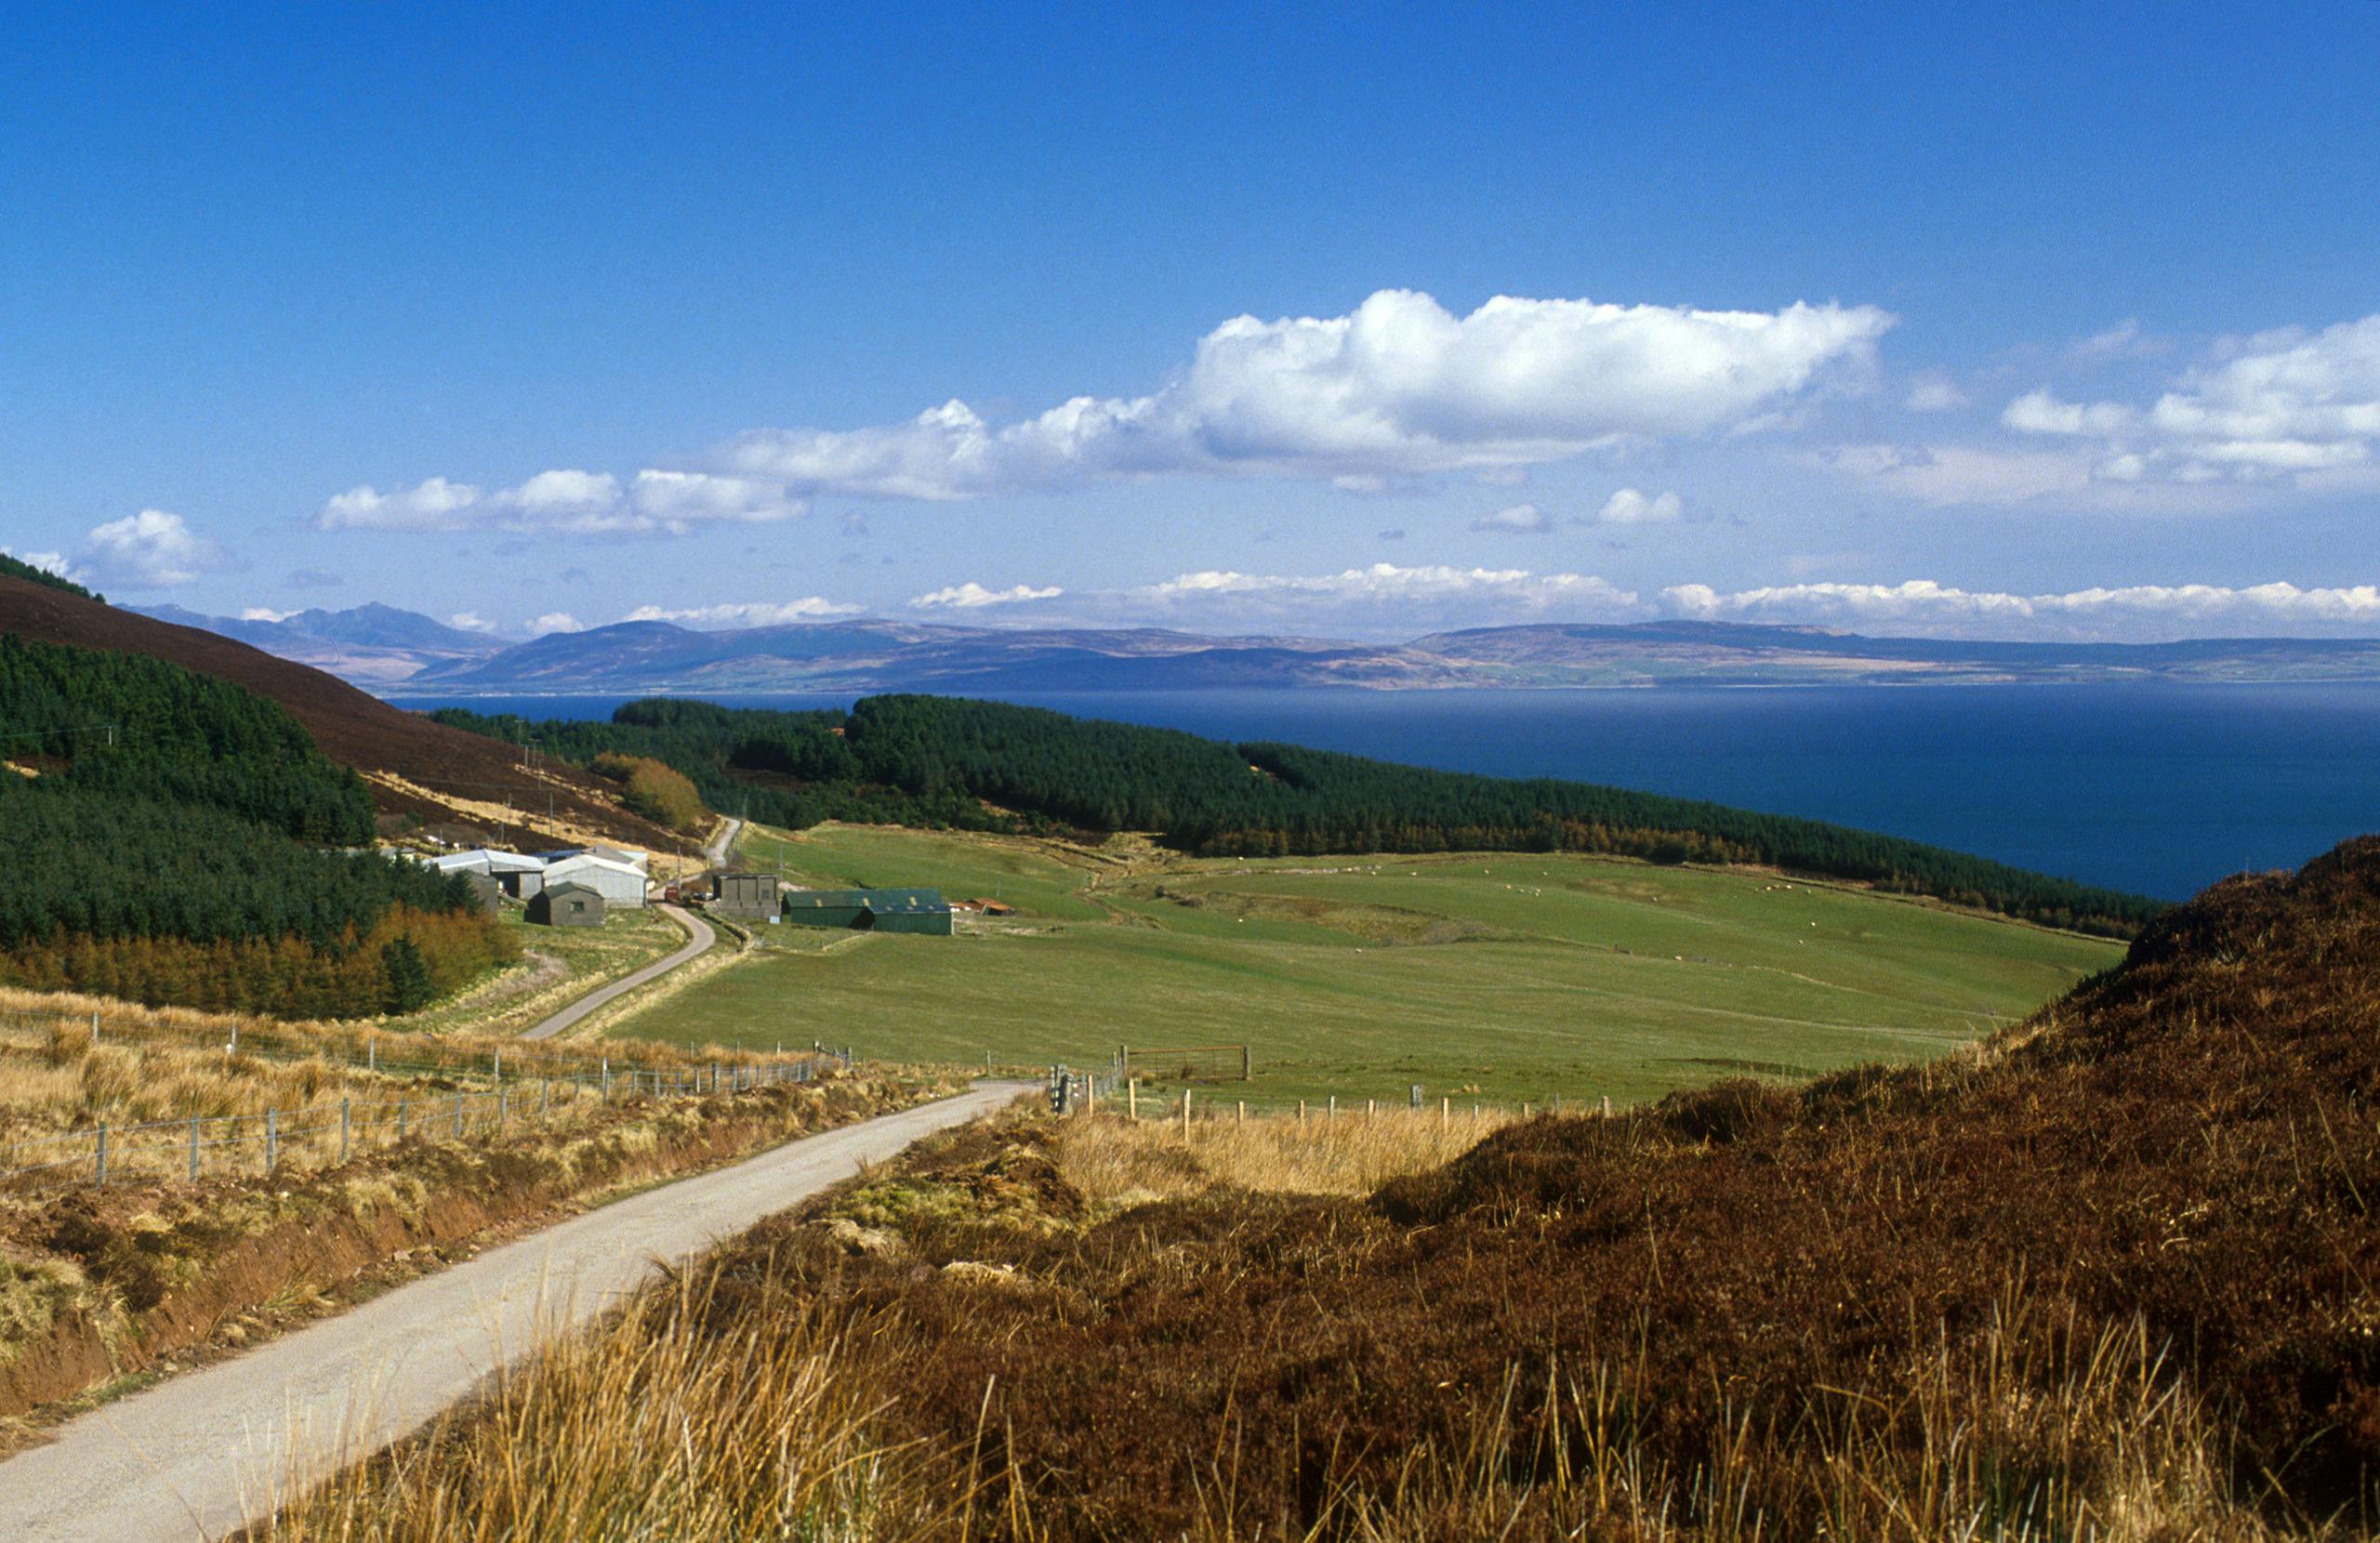 Looking East Down A Single Track Road On The Kintyre Peninsula Across The Kilbrannan Sound To The Isle Of Arran